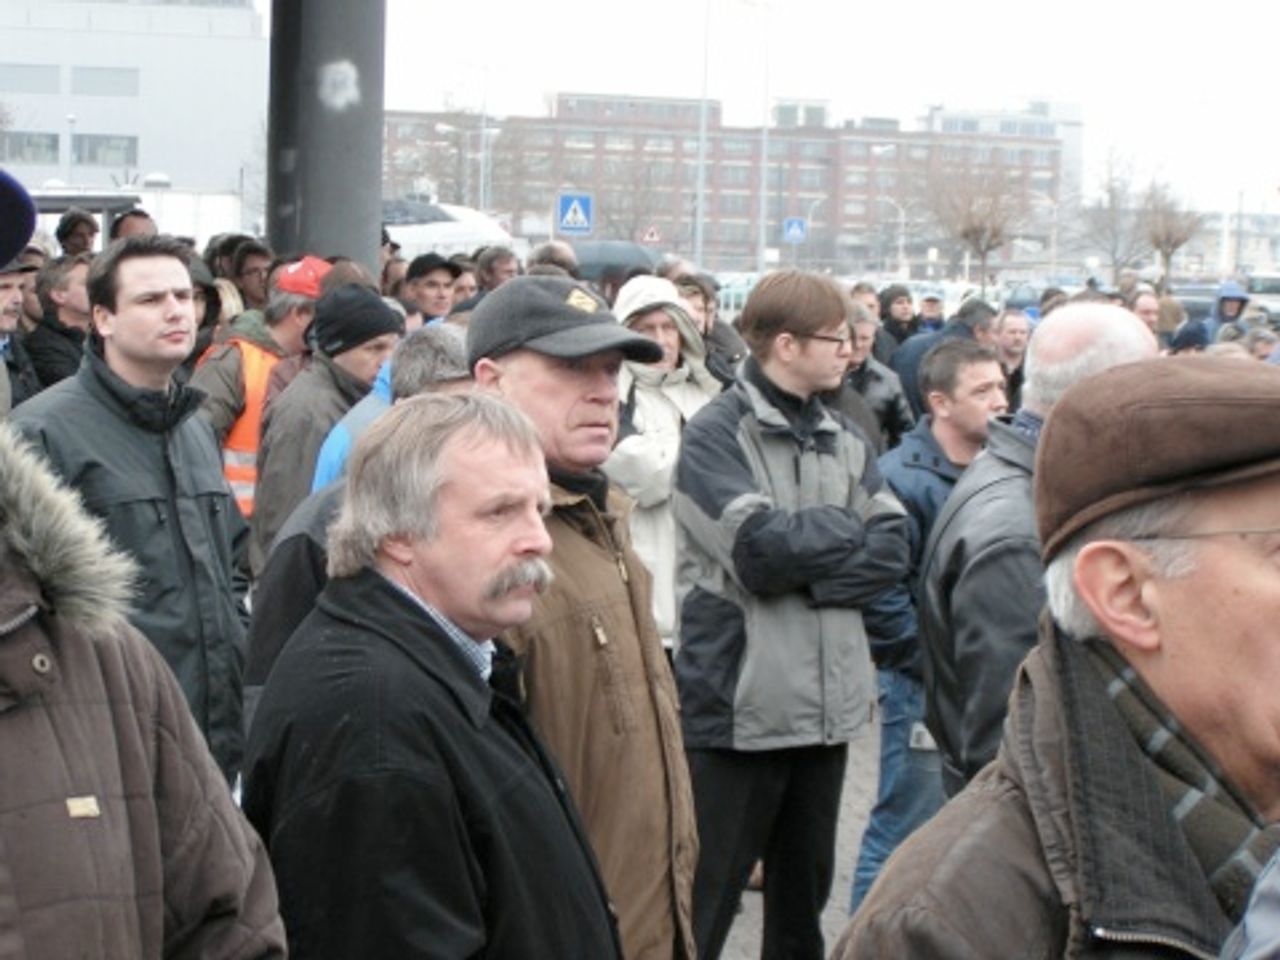 Workers listen to the speeches at the Rüsselsheim rally